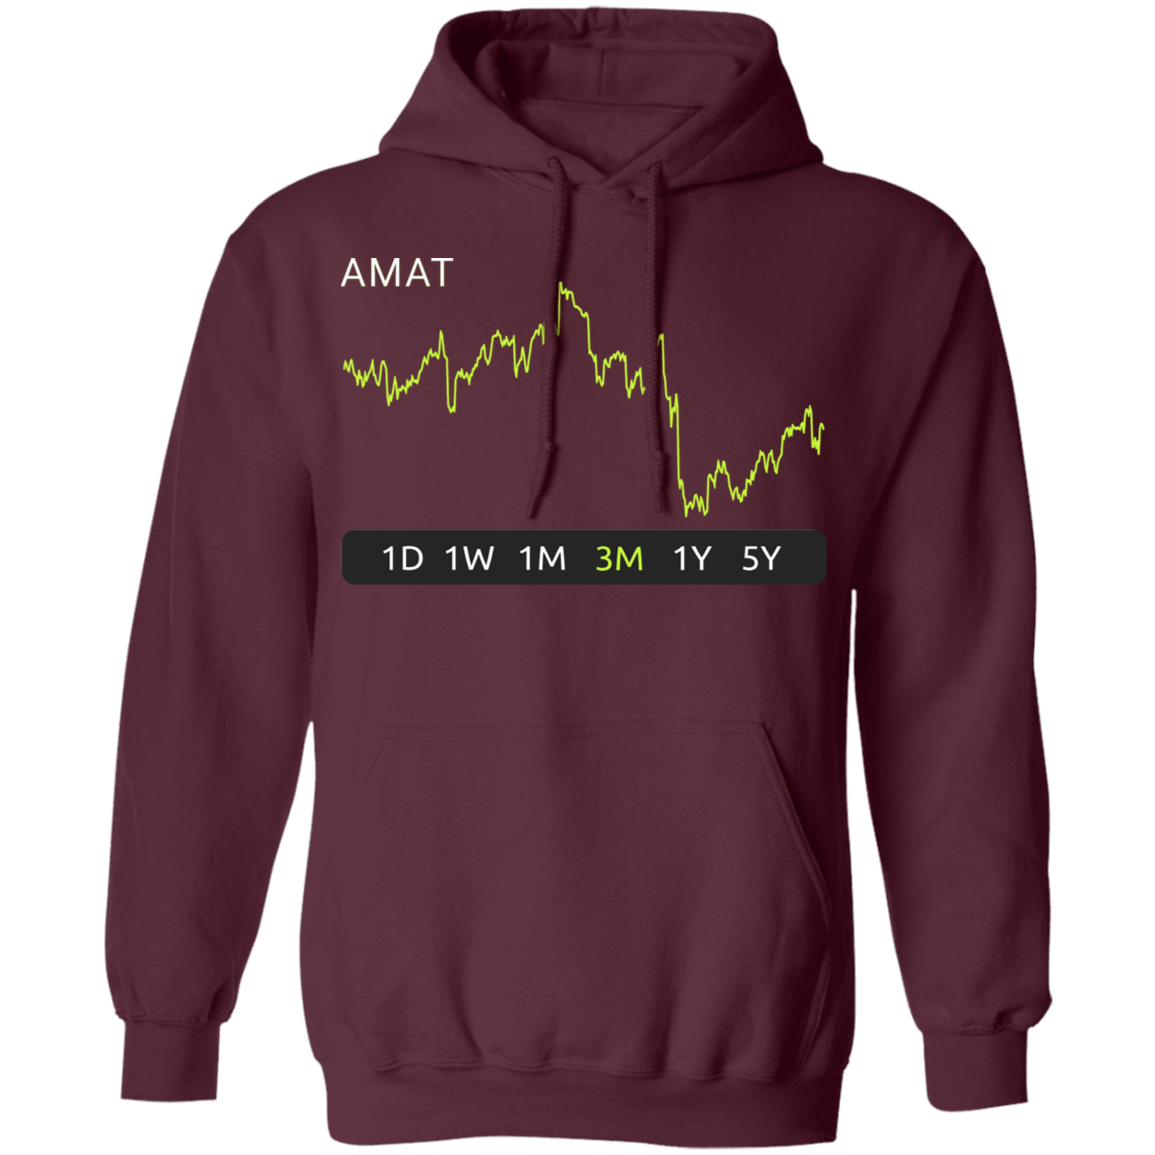 AMAT Stock 3m Pullover Hoodie